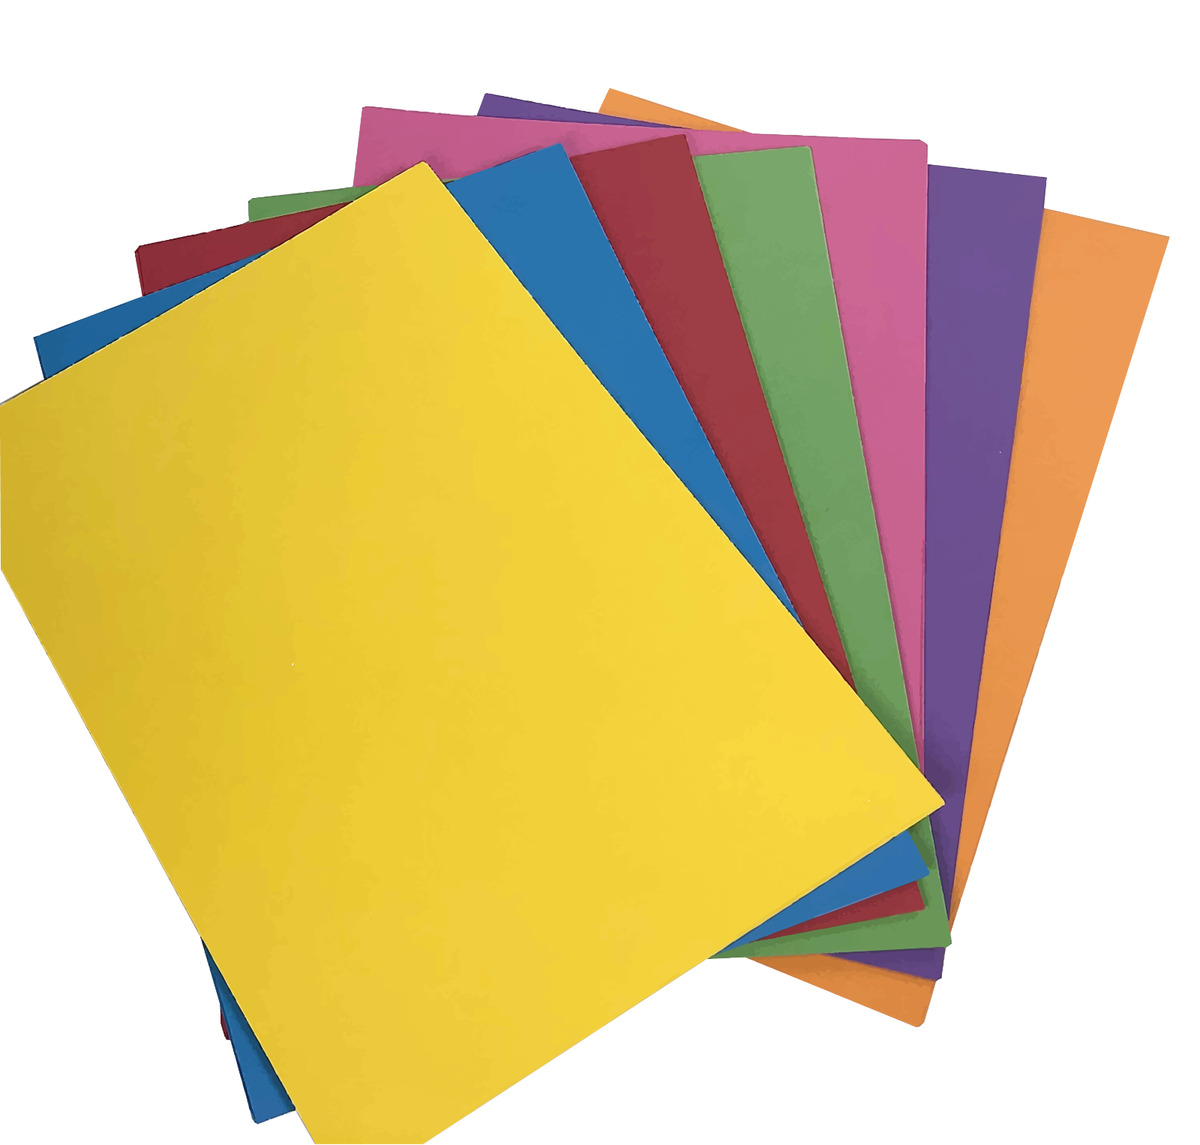 A4 SUGAR/ACTIVITY/CONSTRUCTION PAPER:100 SHEETS, 10 COLOURS COLLAGE CRAFT  OFFICE